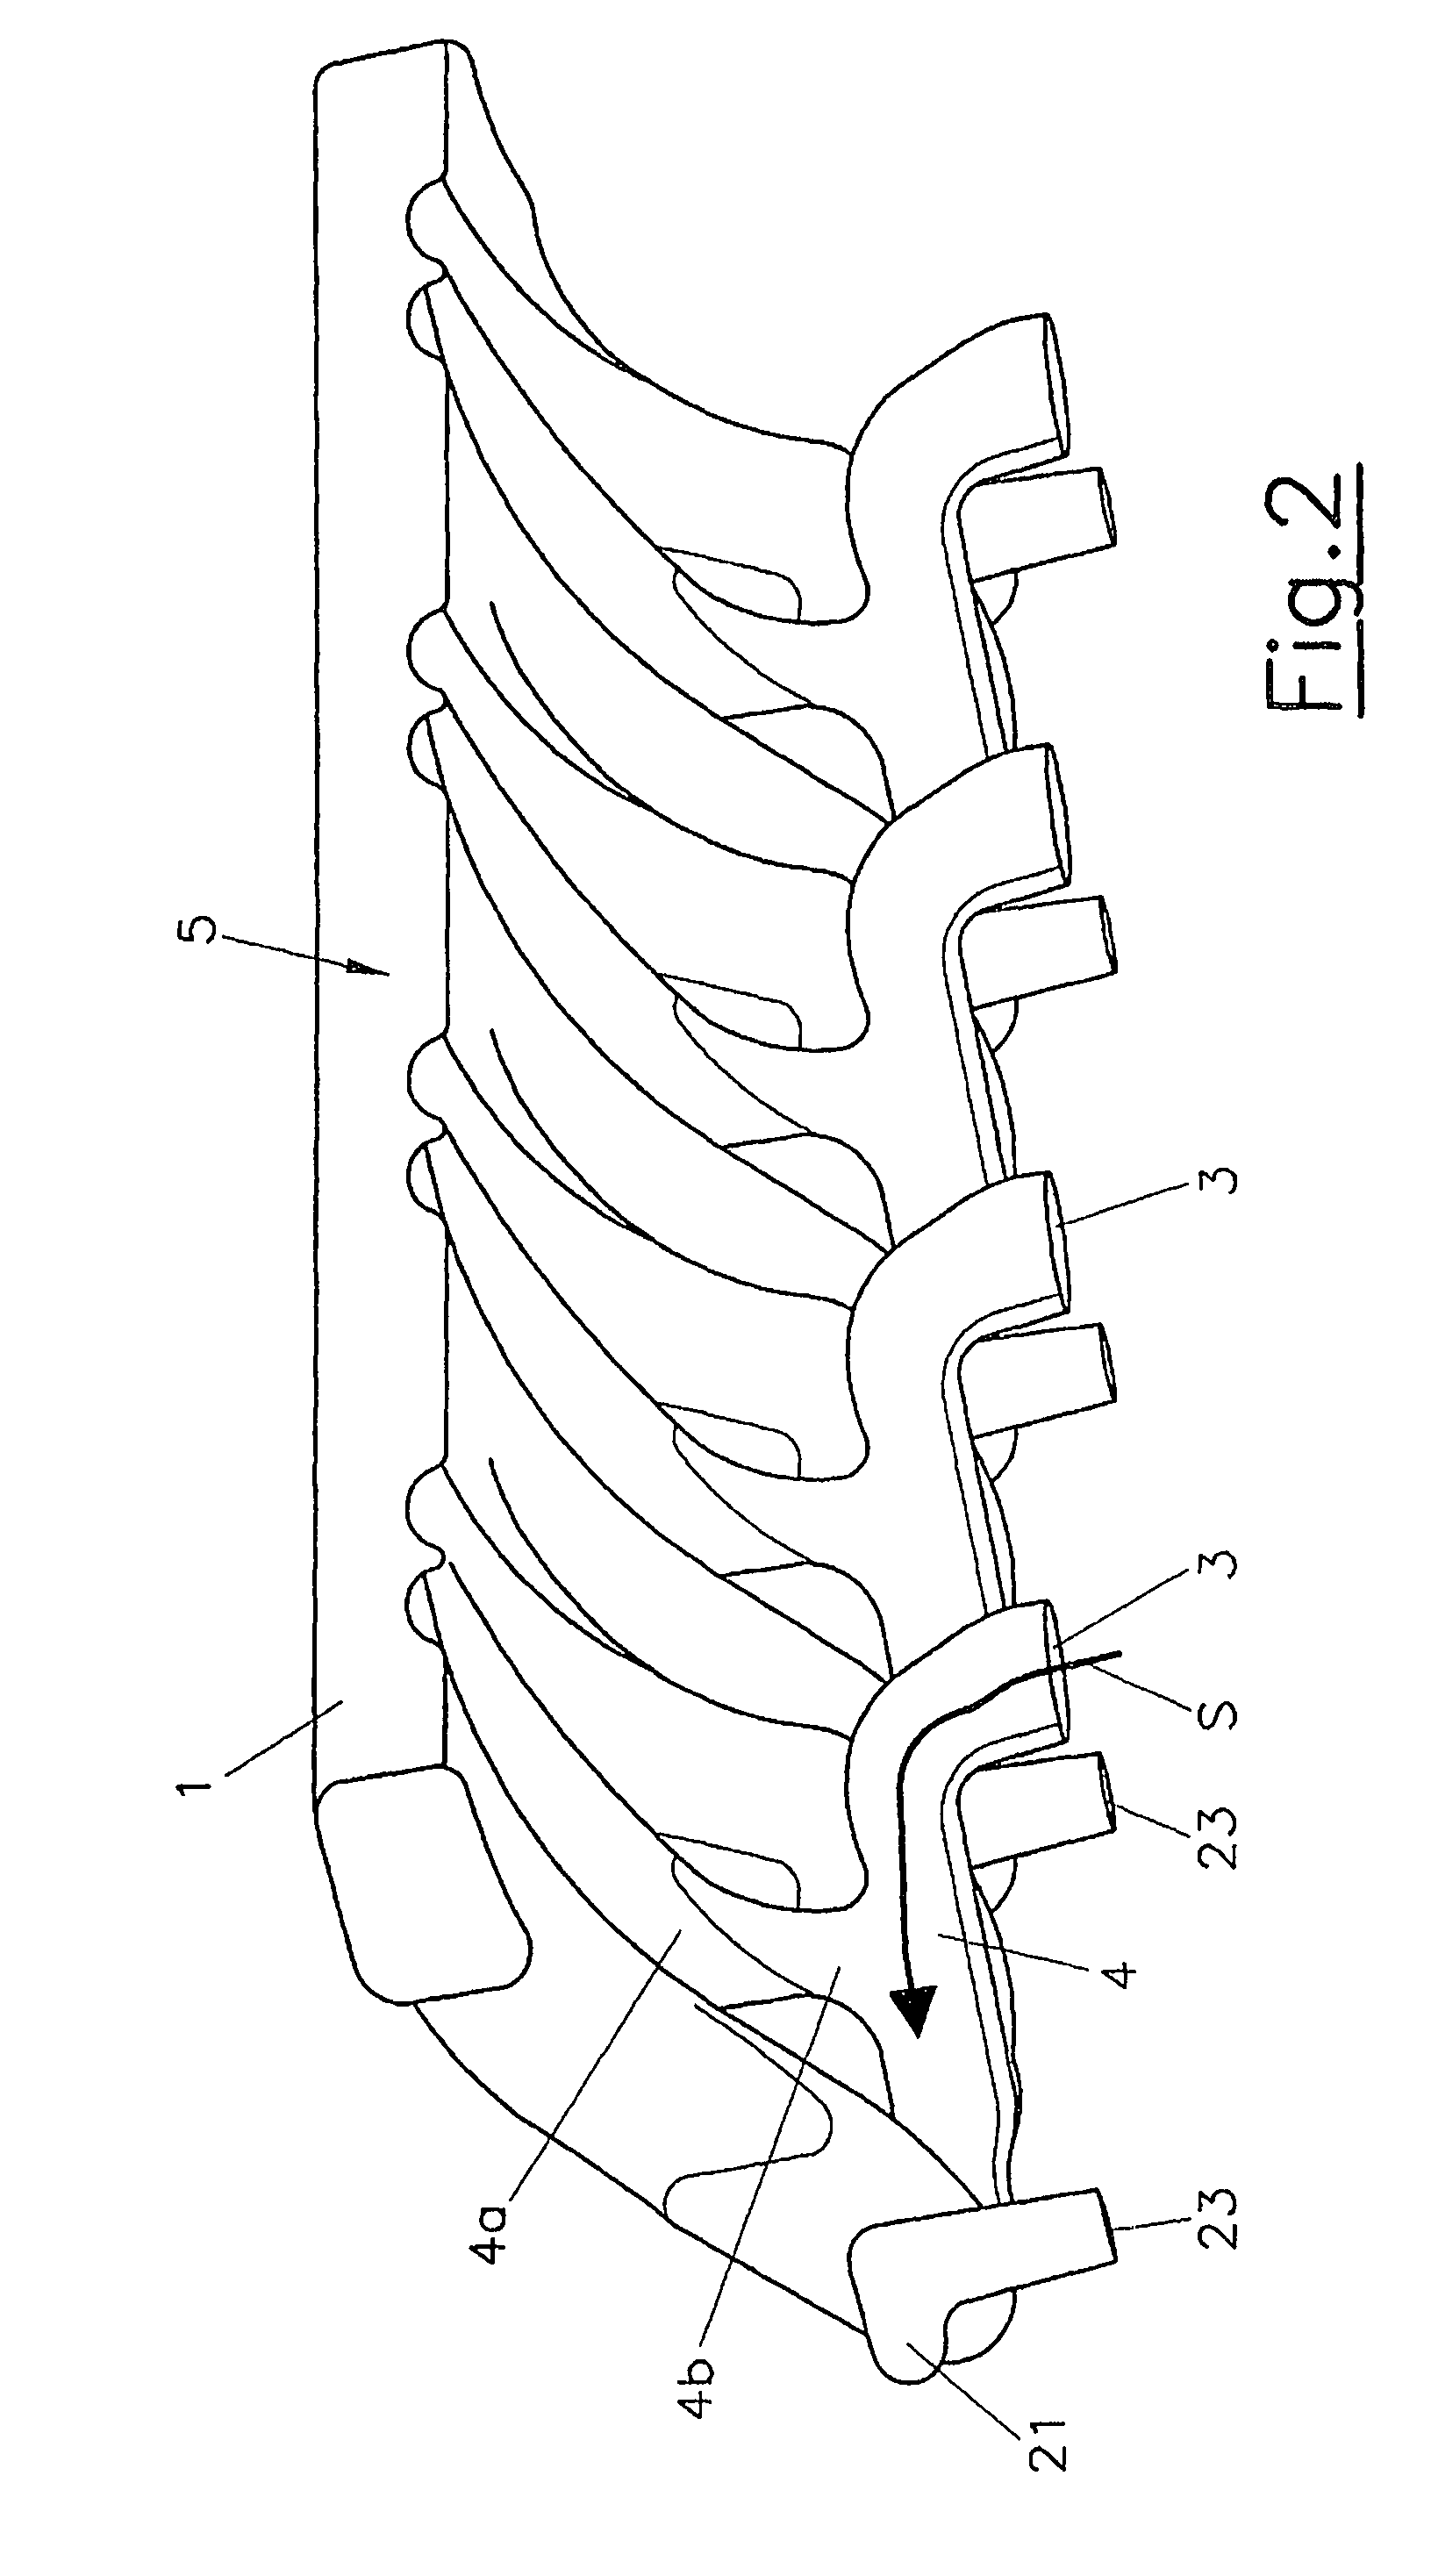 Cylinder head of an internal combustion engine